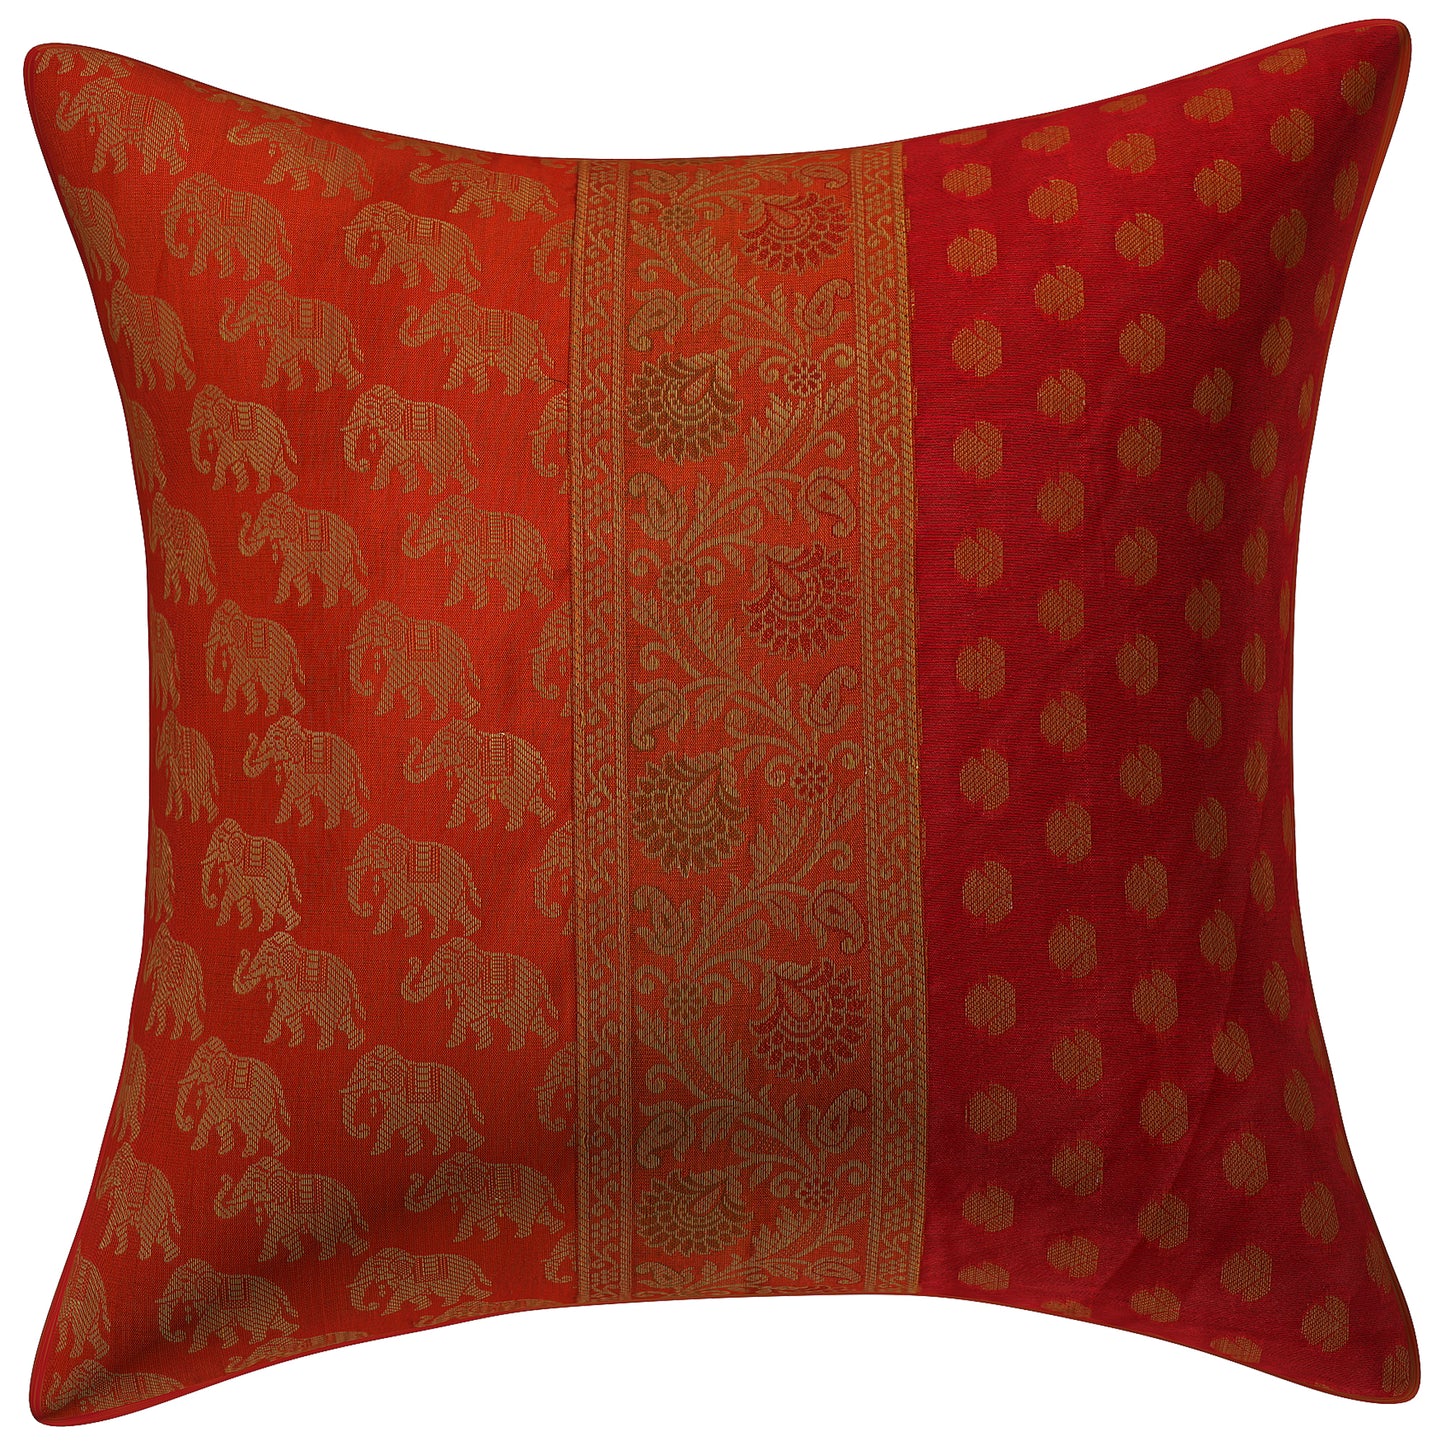 Indian Ethnic Brocade Silk Orange & Red Elephant cushion Cover Throw Pillow for Couch Sofa Home Décor Pillow Cover 16X16 In Set 2 Pc